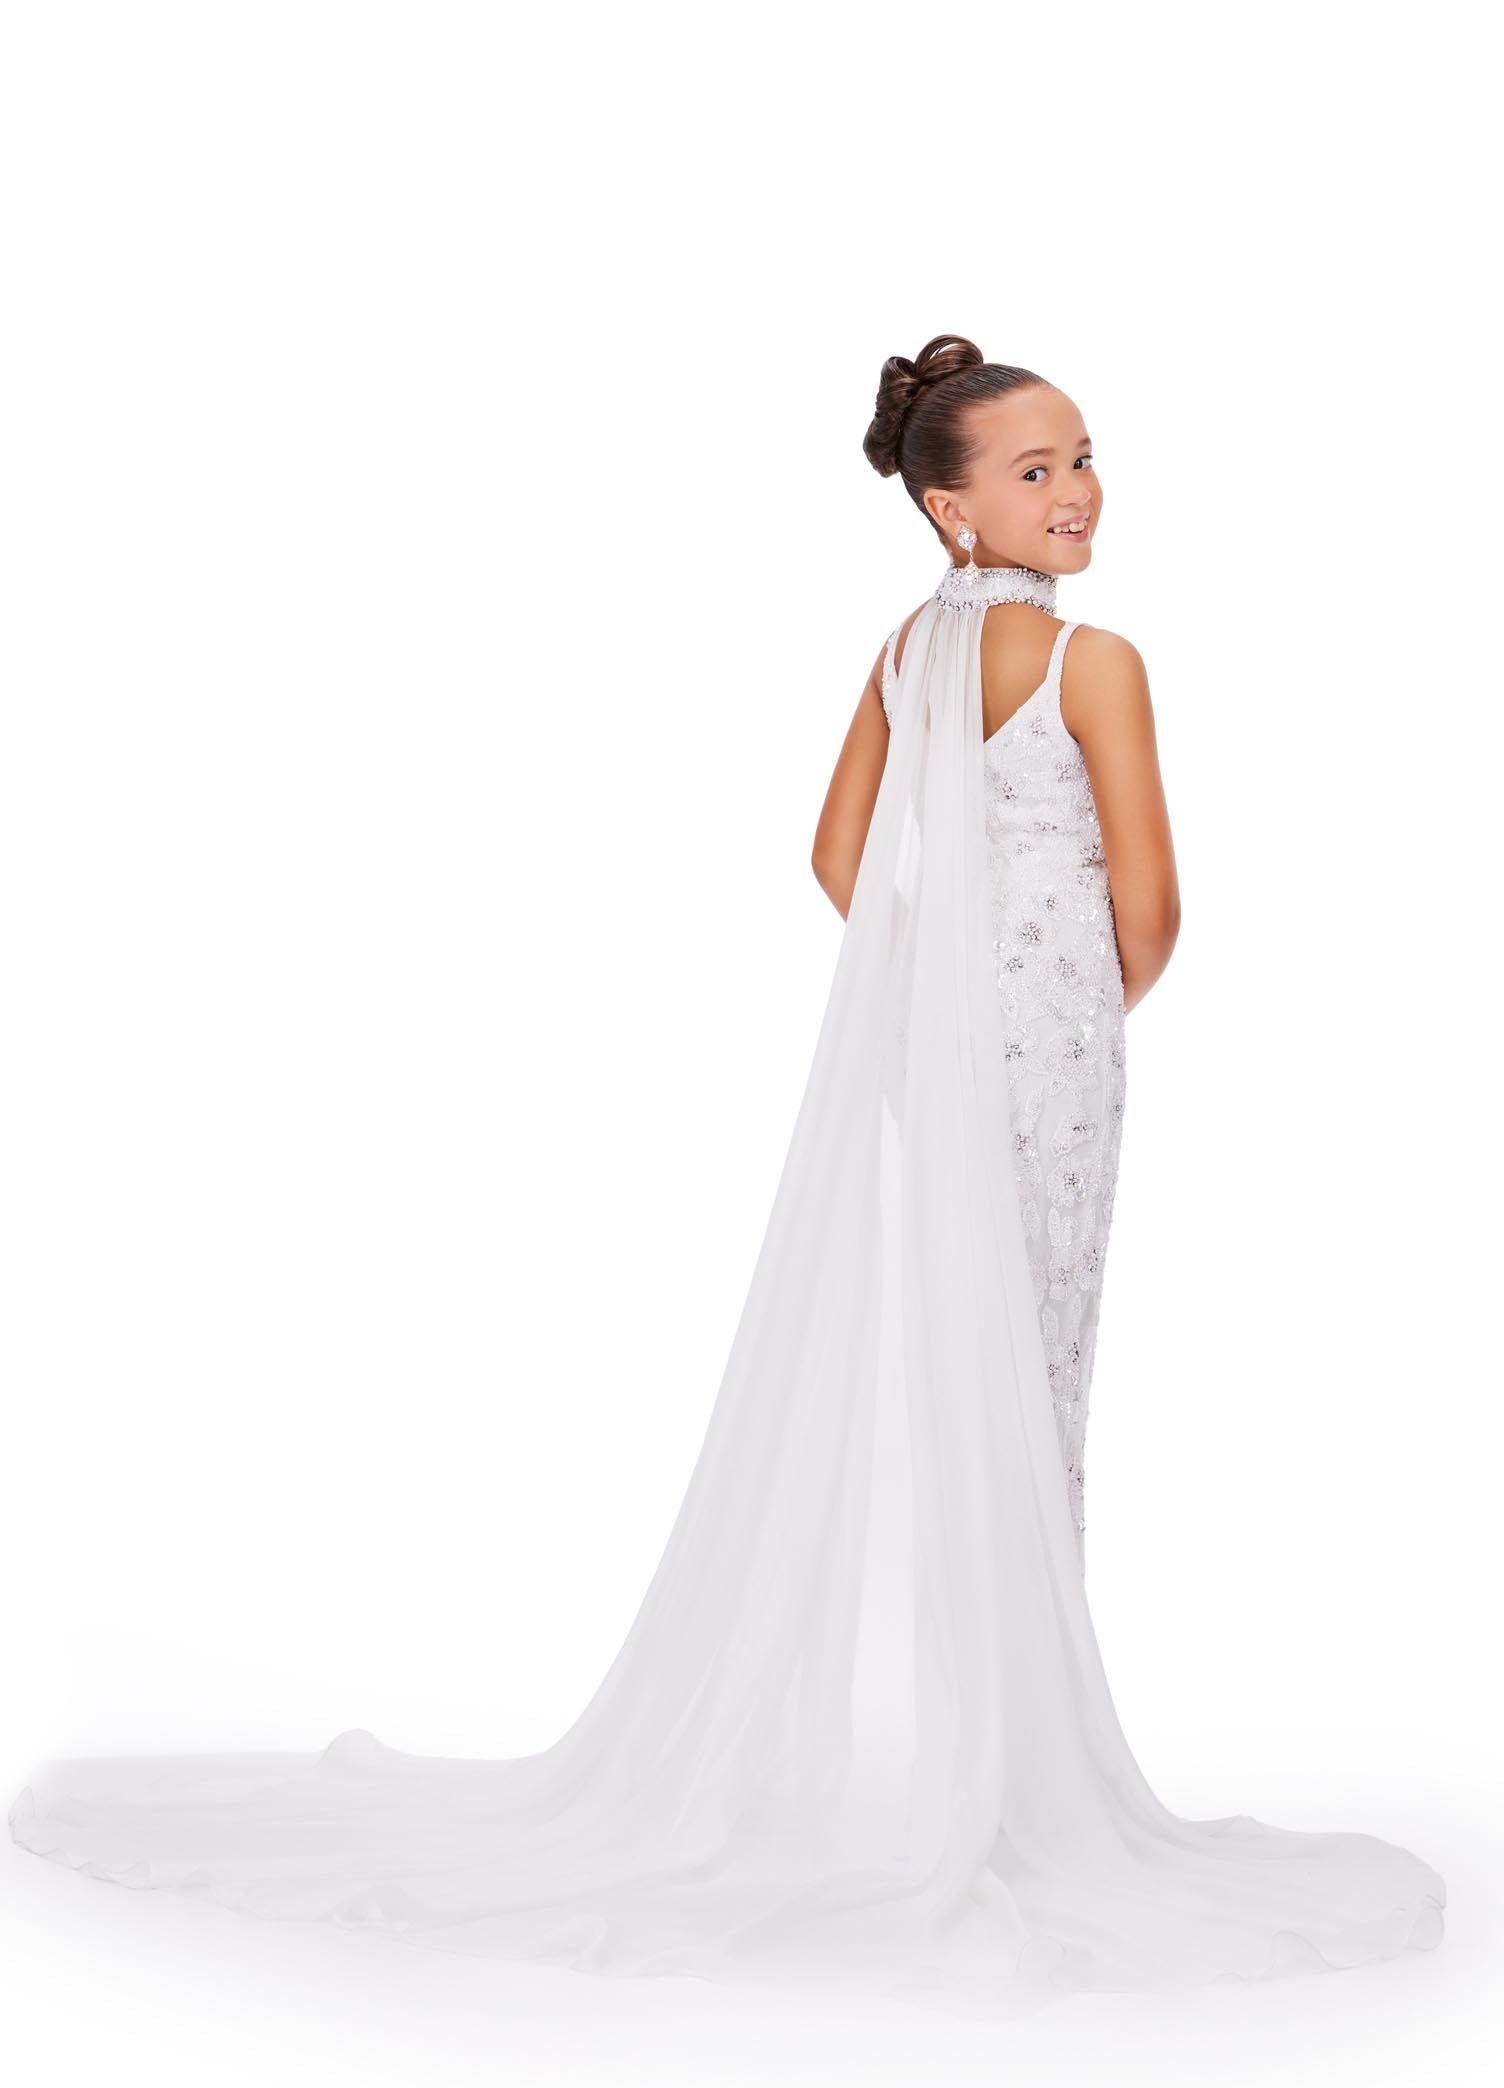 Ashley Lauren Kids 8190 Ivory Fully Beaded With Beaded Choker And Chiffon Cape Jumpsuit 